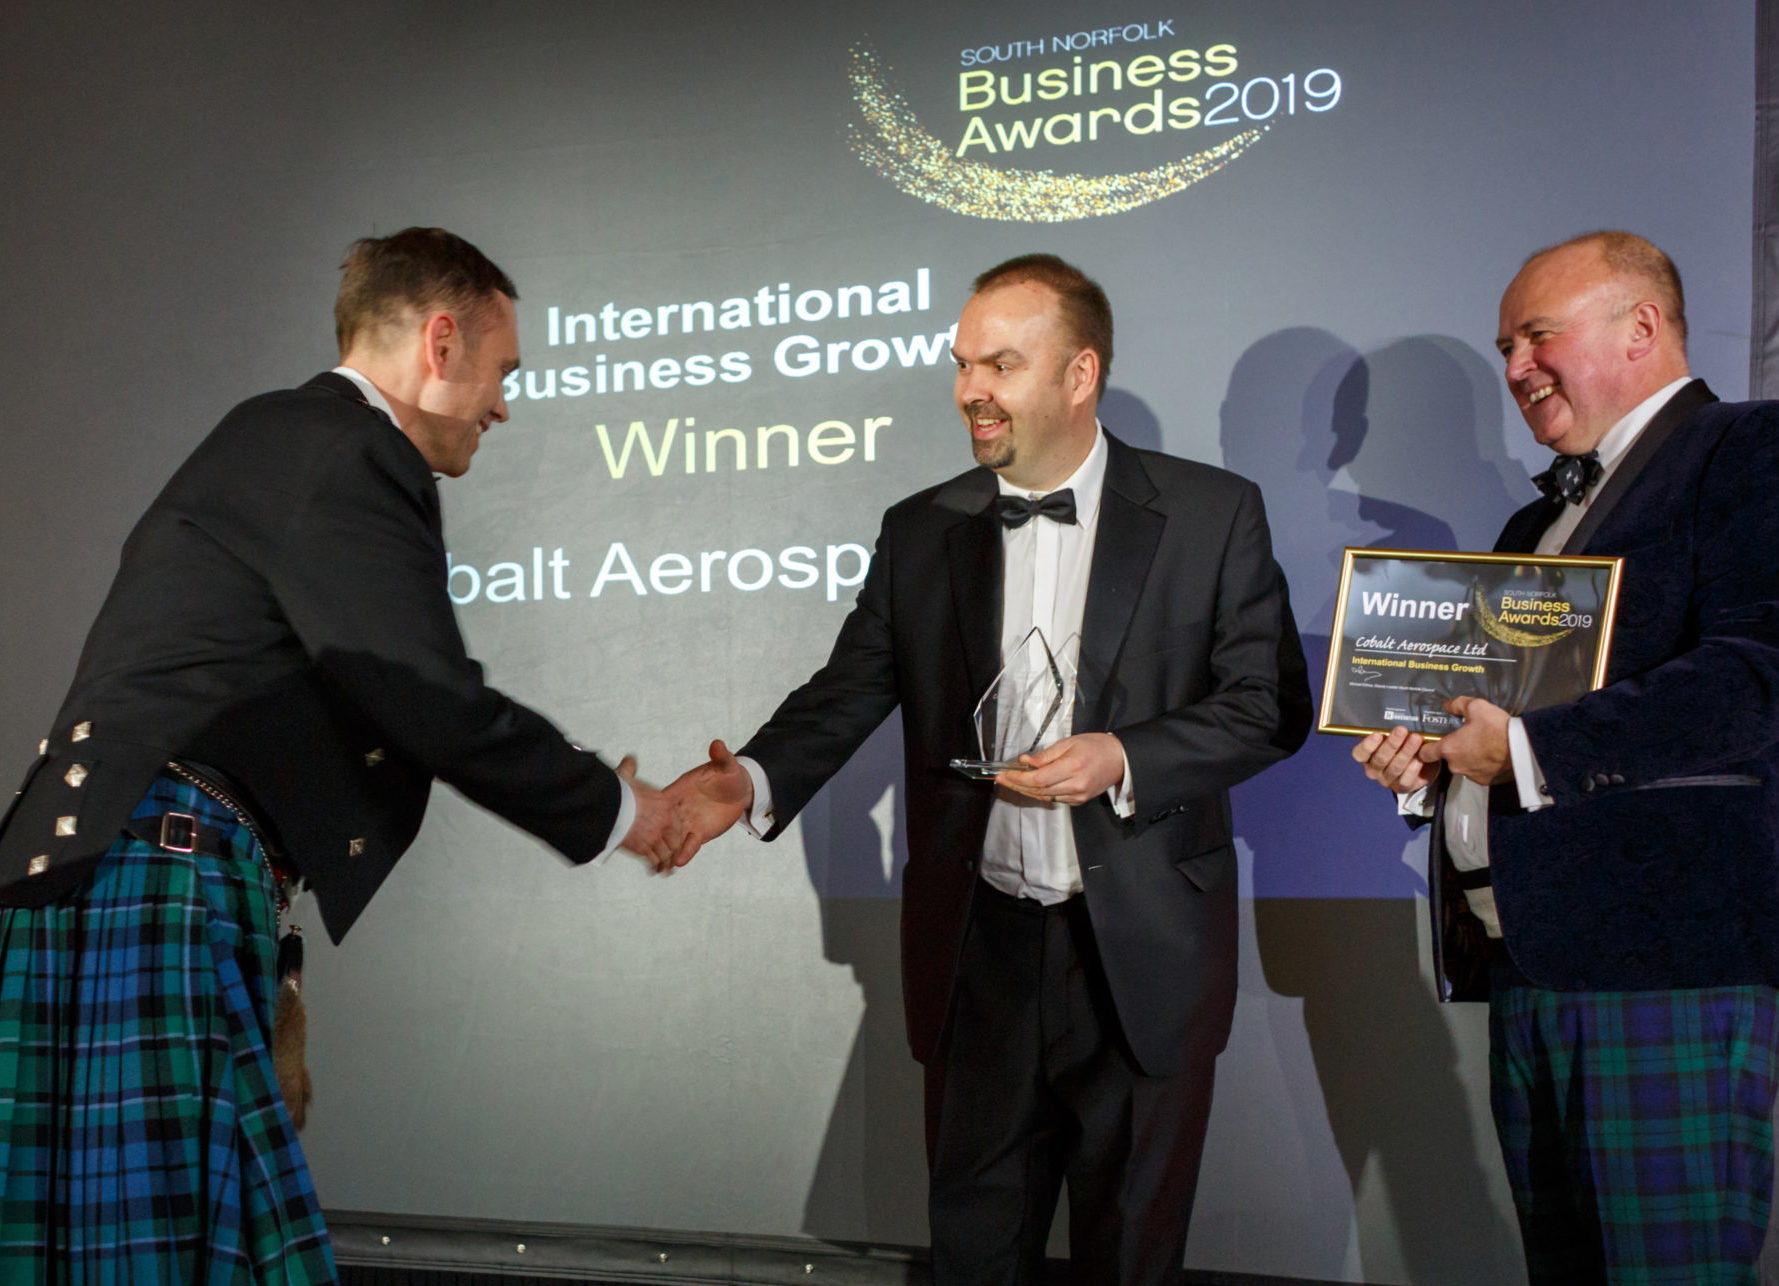 Founder and director Ben Brown accepts the award for 'International Business Growth' at the South Norfolk Business Awards 2019.